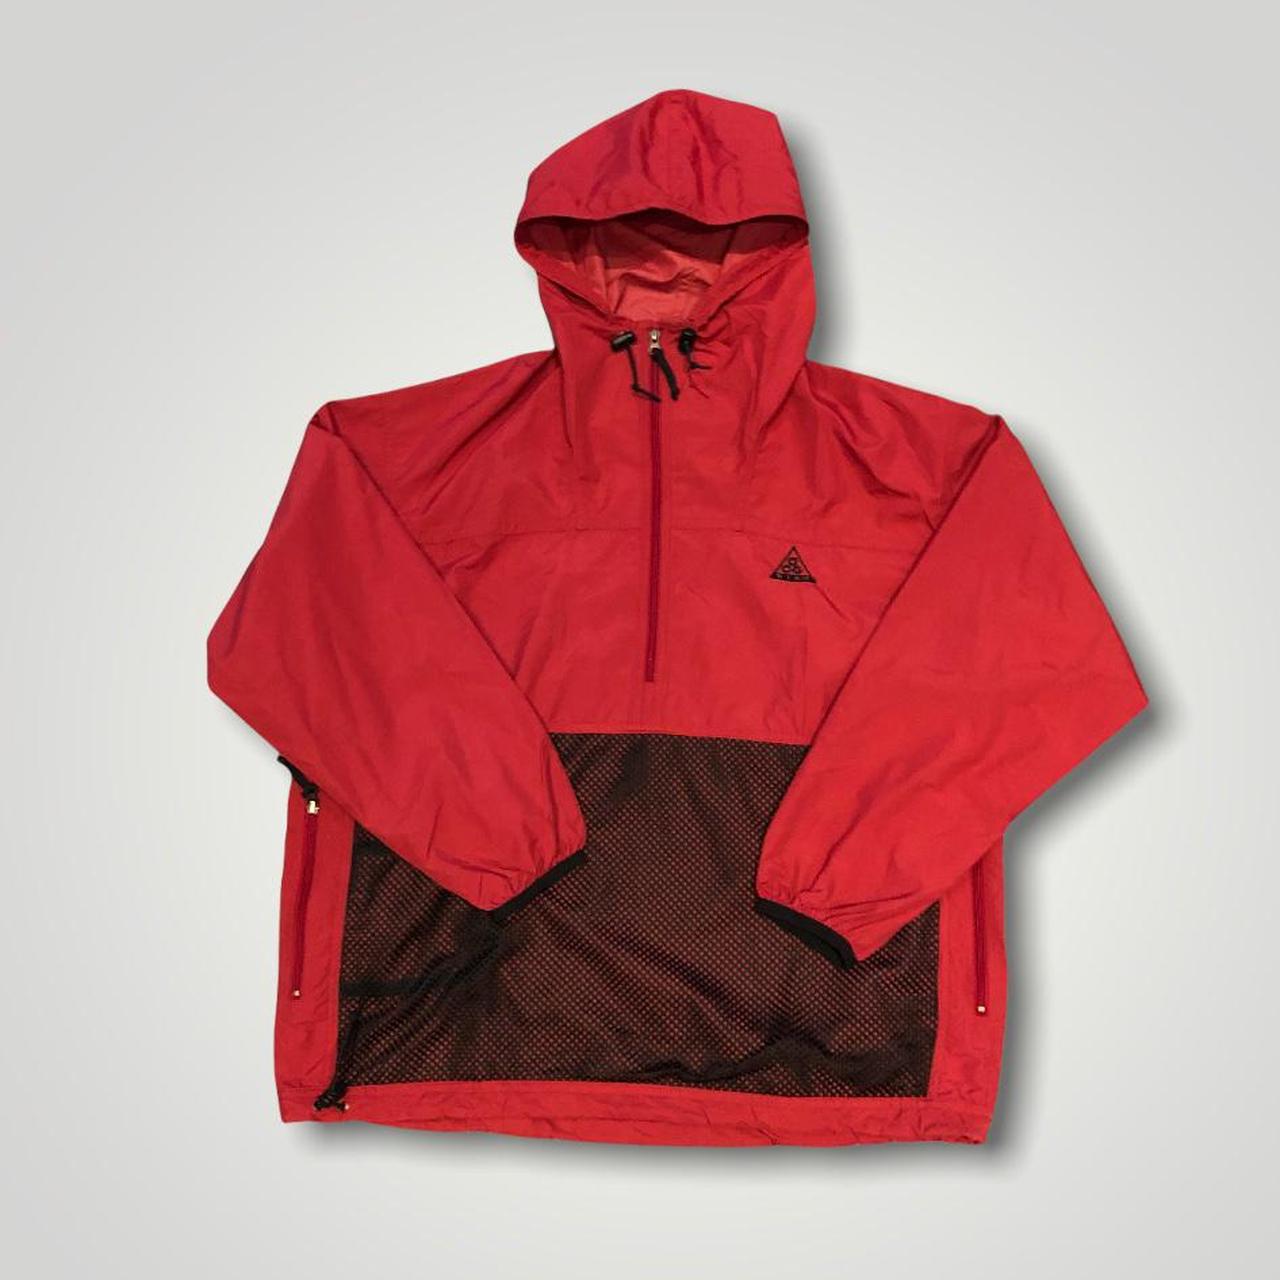 Vintage Nike ACG Jacket red pullover jacket with